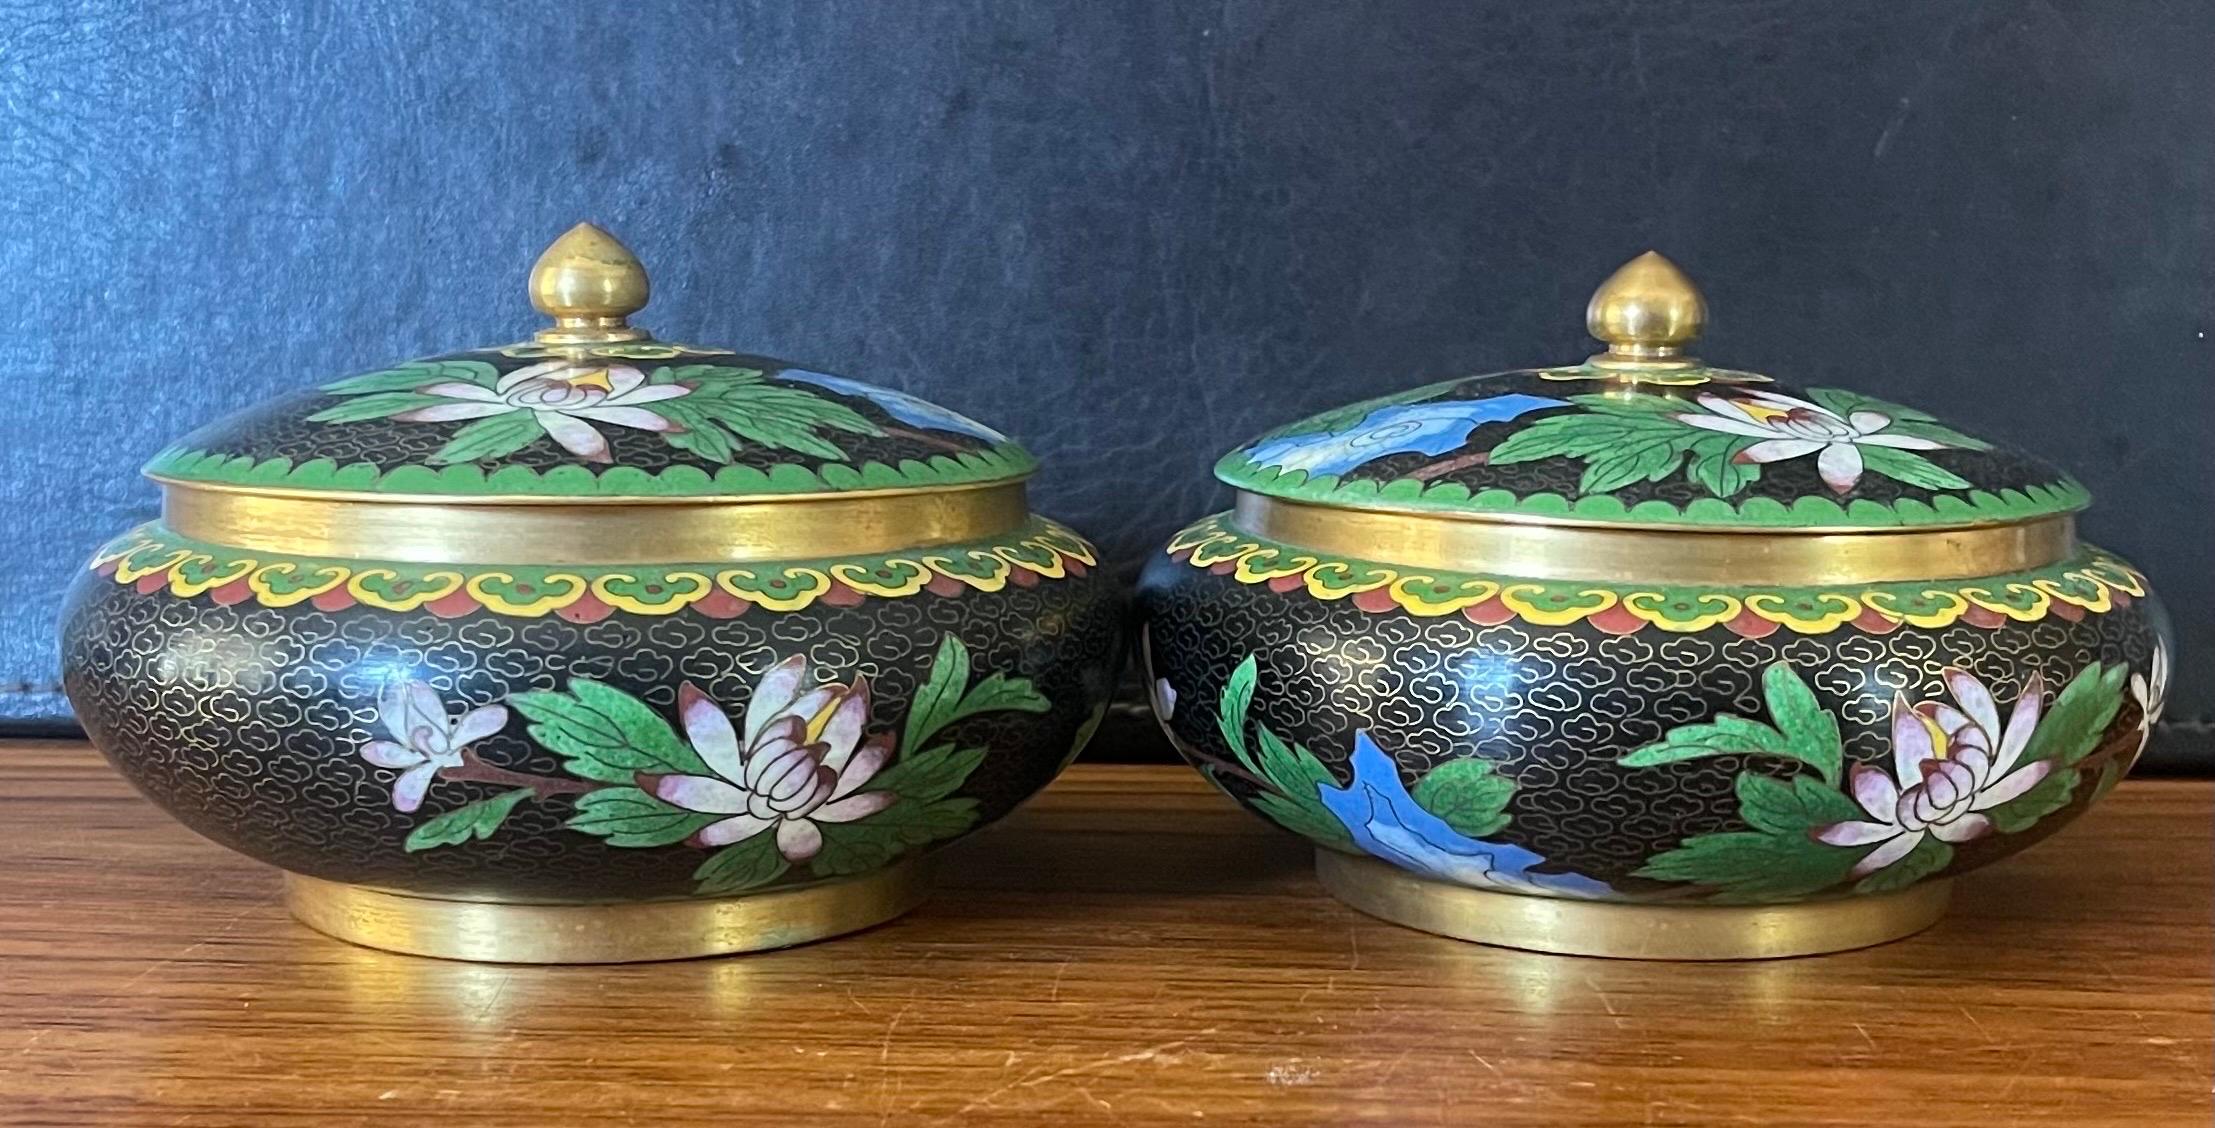 Mirrored Pair of Chinese Cloisonne Lidded Bowls with Floral Motif In Good Condition For Sale In San Diego, CA